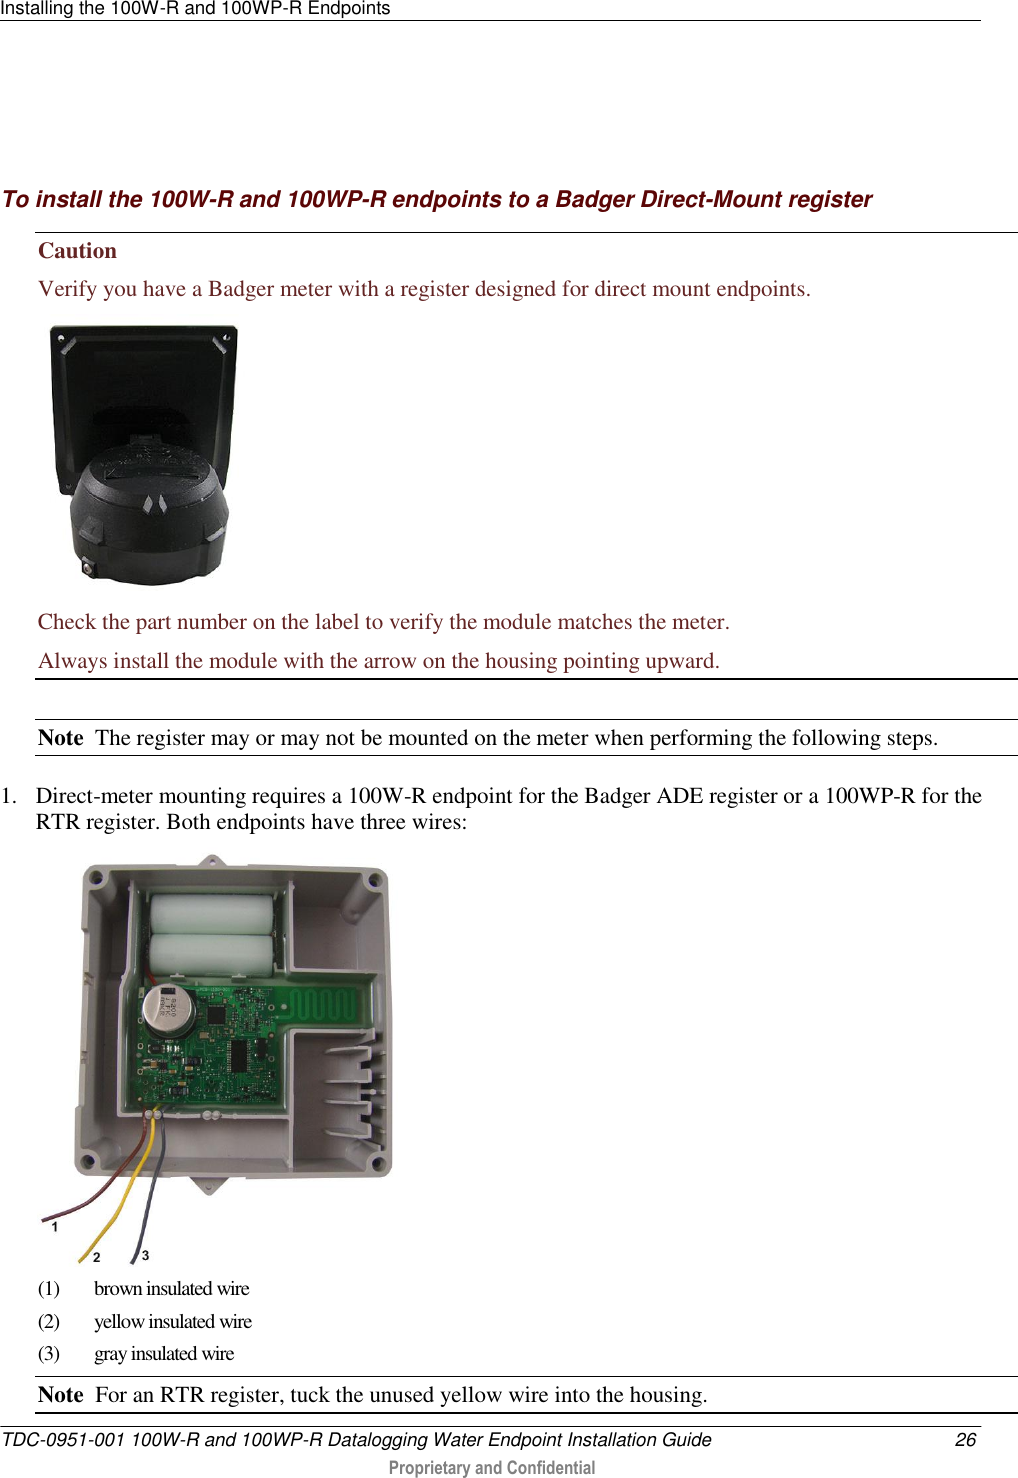 Installing the 100W-R and 100WP-R Endpoints   TDC-0951-001 100W-R and 100WP-R Datalogging Water Endpoint Installation Guide  26  Proprietary and Confidential       To install the 100W-R and 100WP-R endpoints to a Badger Direct-Mount register Caution   Verify you have a Badger meter with a register designed for direct mount endpoints.  Check the part number on the label to verify the module matches the meter. Always install the module with the arrow on the housing pointing upward.  Note  The register may or may not be mounted on the meter when performing the following steps.    1. Direct-meter mounting requires a 100W-R endpoint for the Badger ADE register or a 100WP-R for the RTR register. Both endpoints have three wires:  (1)  brown insulated wire (2) yellow insulated wire (3)  gray insulated wire Note  For an RTR register, tuck the unused yellow wire into the housing. 